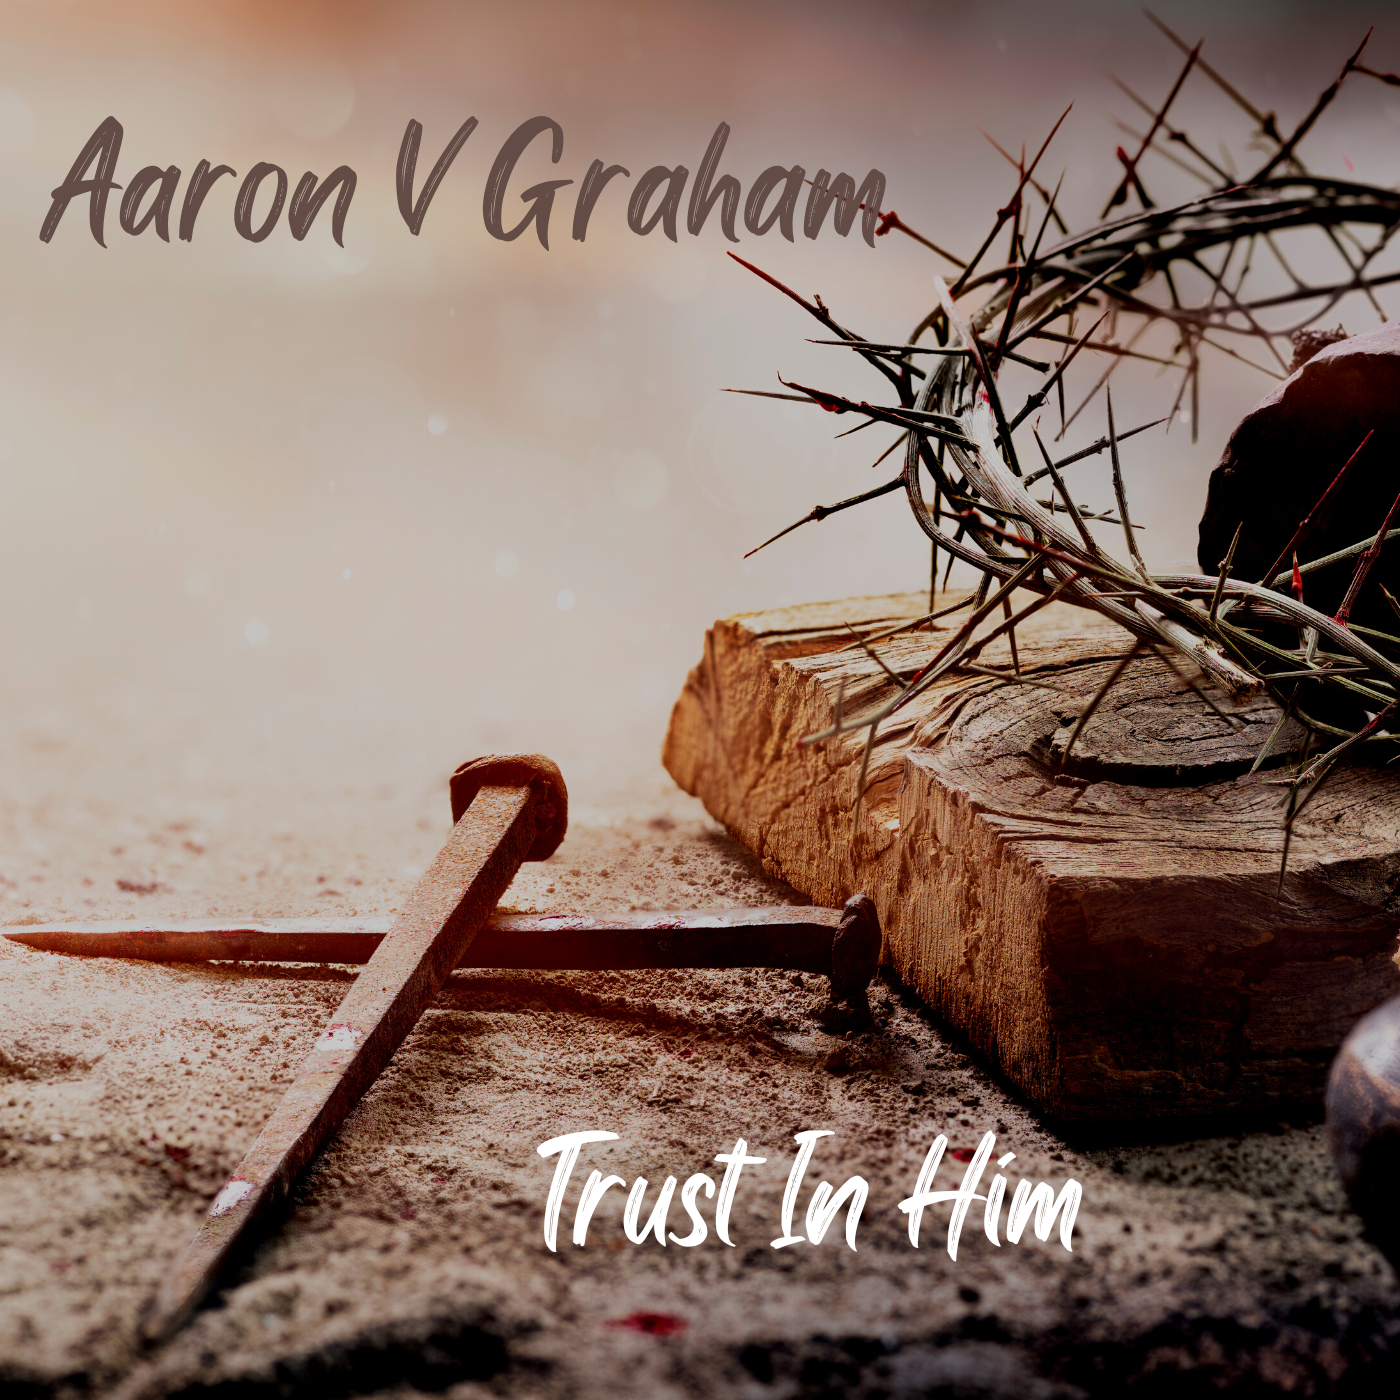 Art for Trust In Him by Aaron V Graham